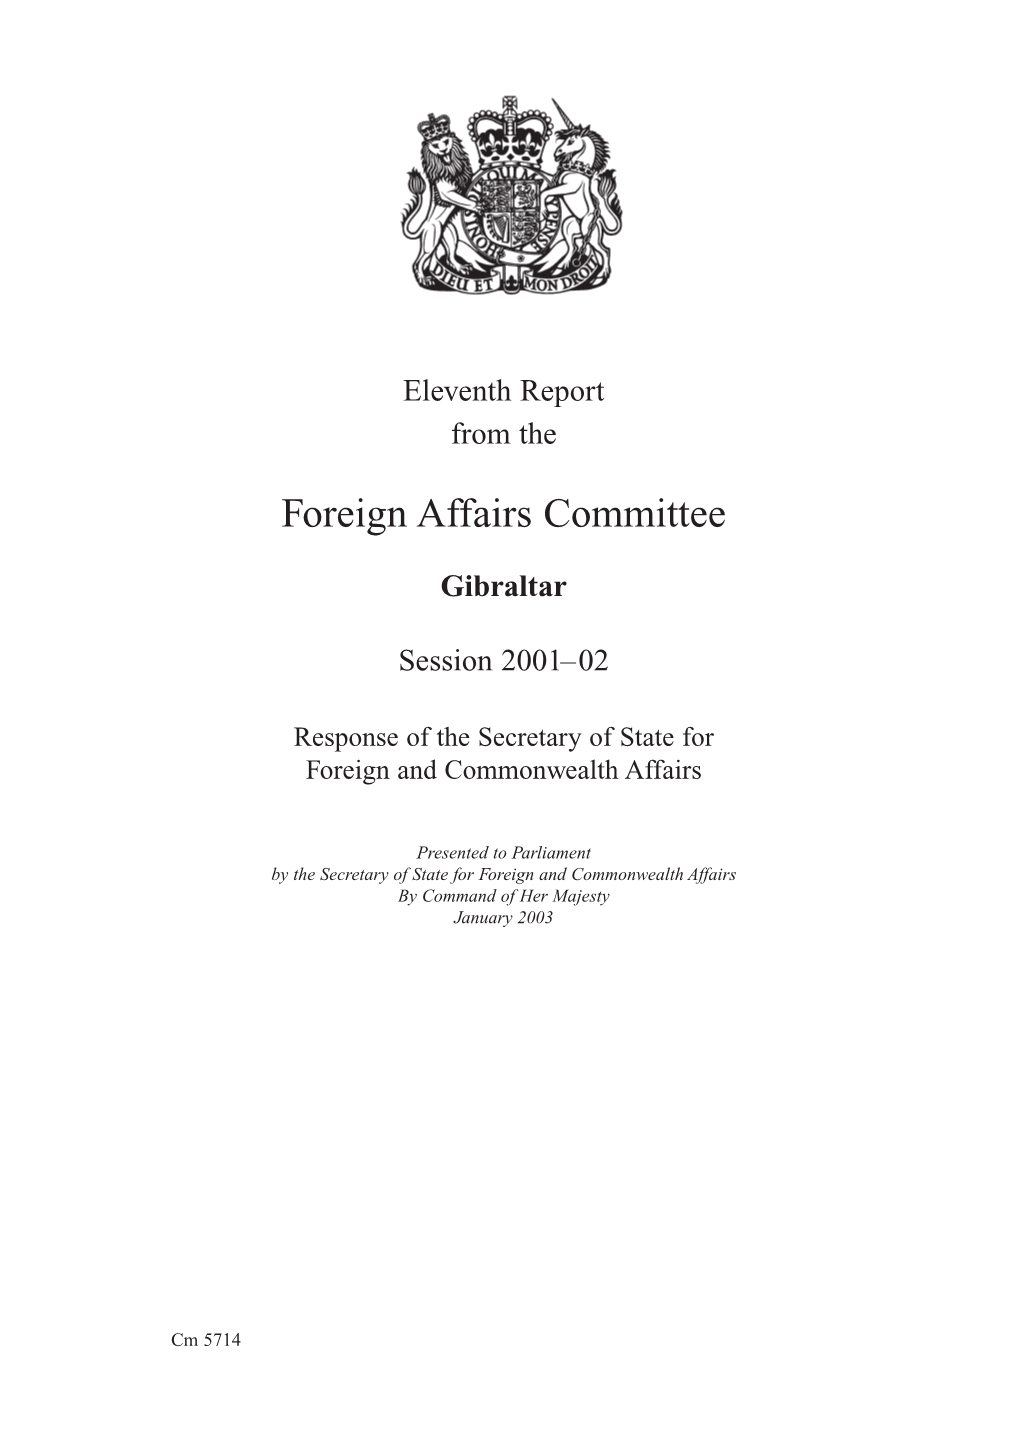 Eleventh Report of the Foreign Affairs Committee CM 5714